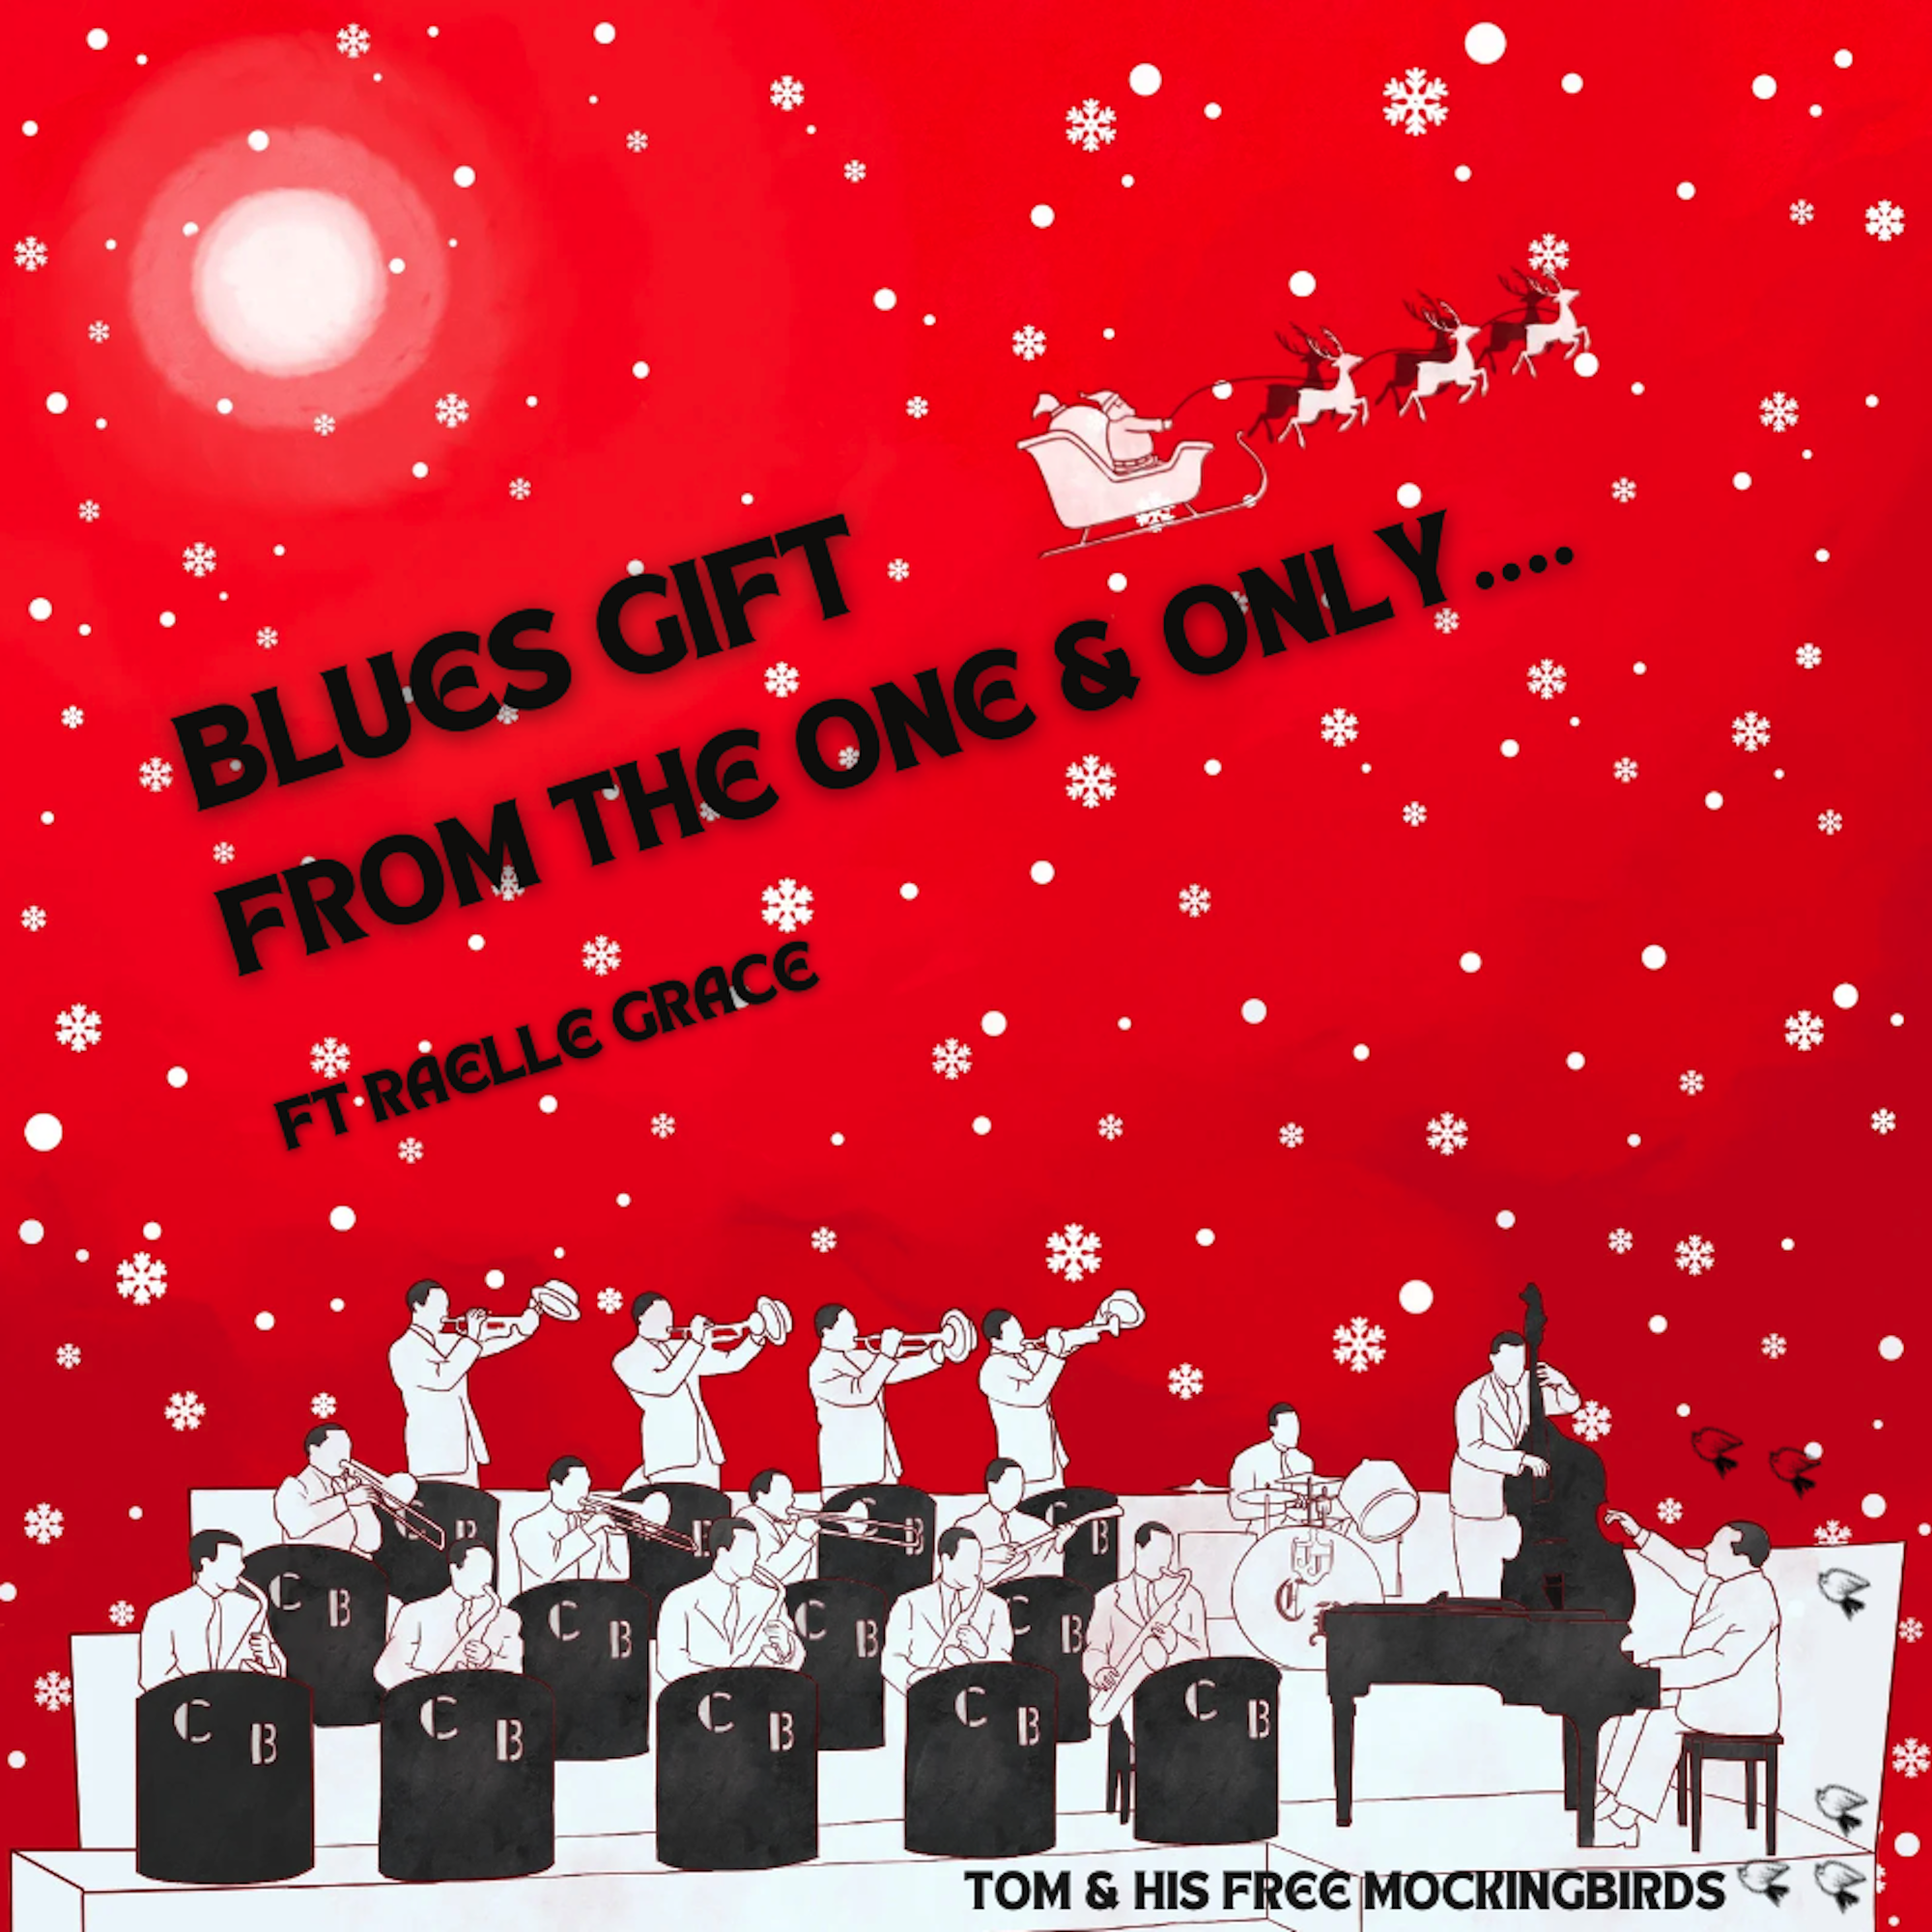 Tom & His Free Mockingbirds Present: A Bluesy Christmas Delight with ‘Blues Gift from the One & Only’ ft. Raelle Grace